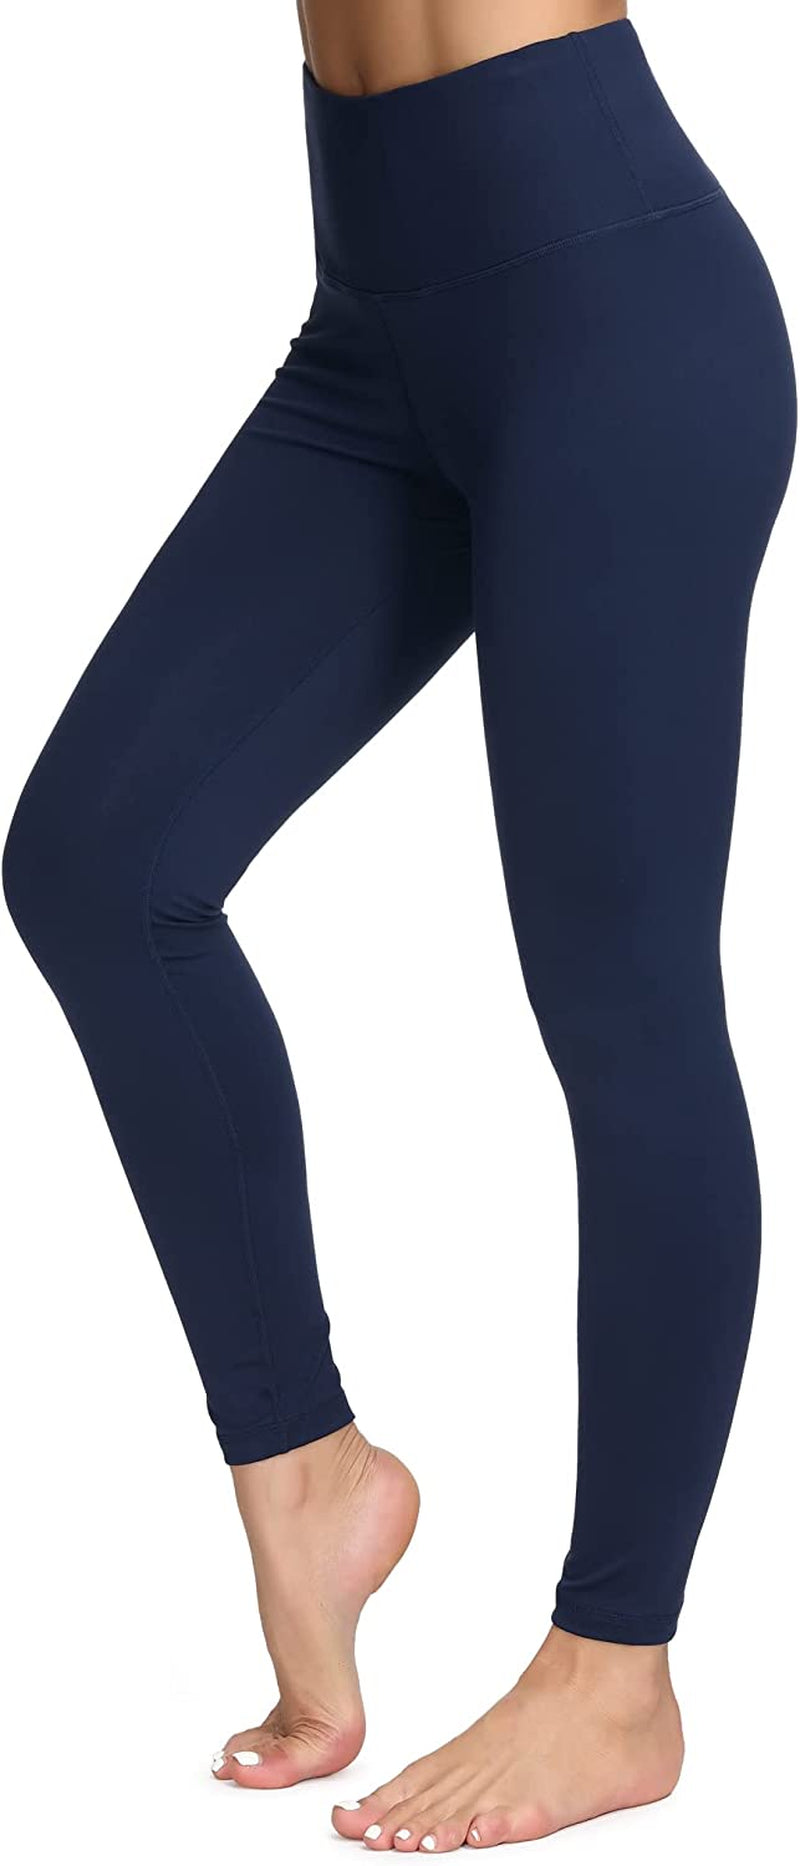 Dragon Fit Compression Yoga Pants with Inner Pockets in High Waist Ath